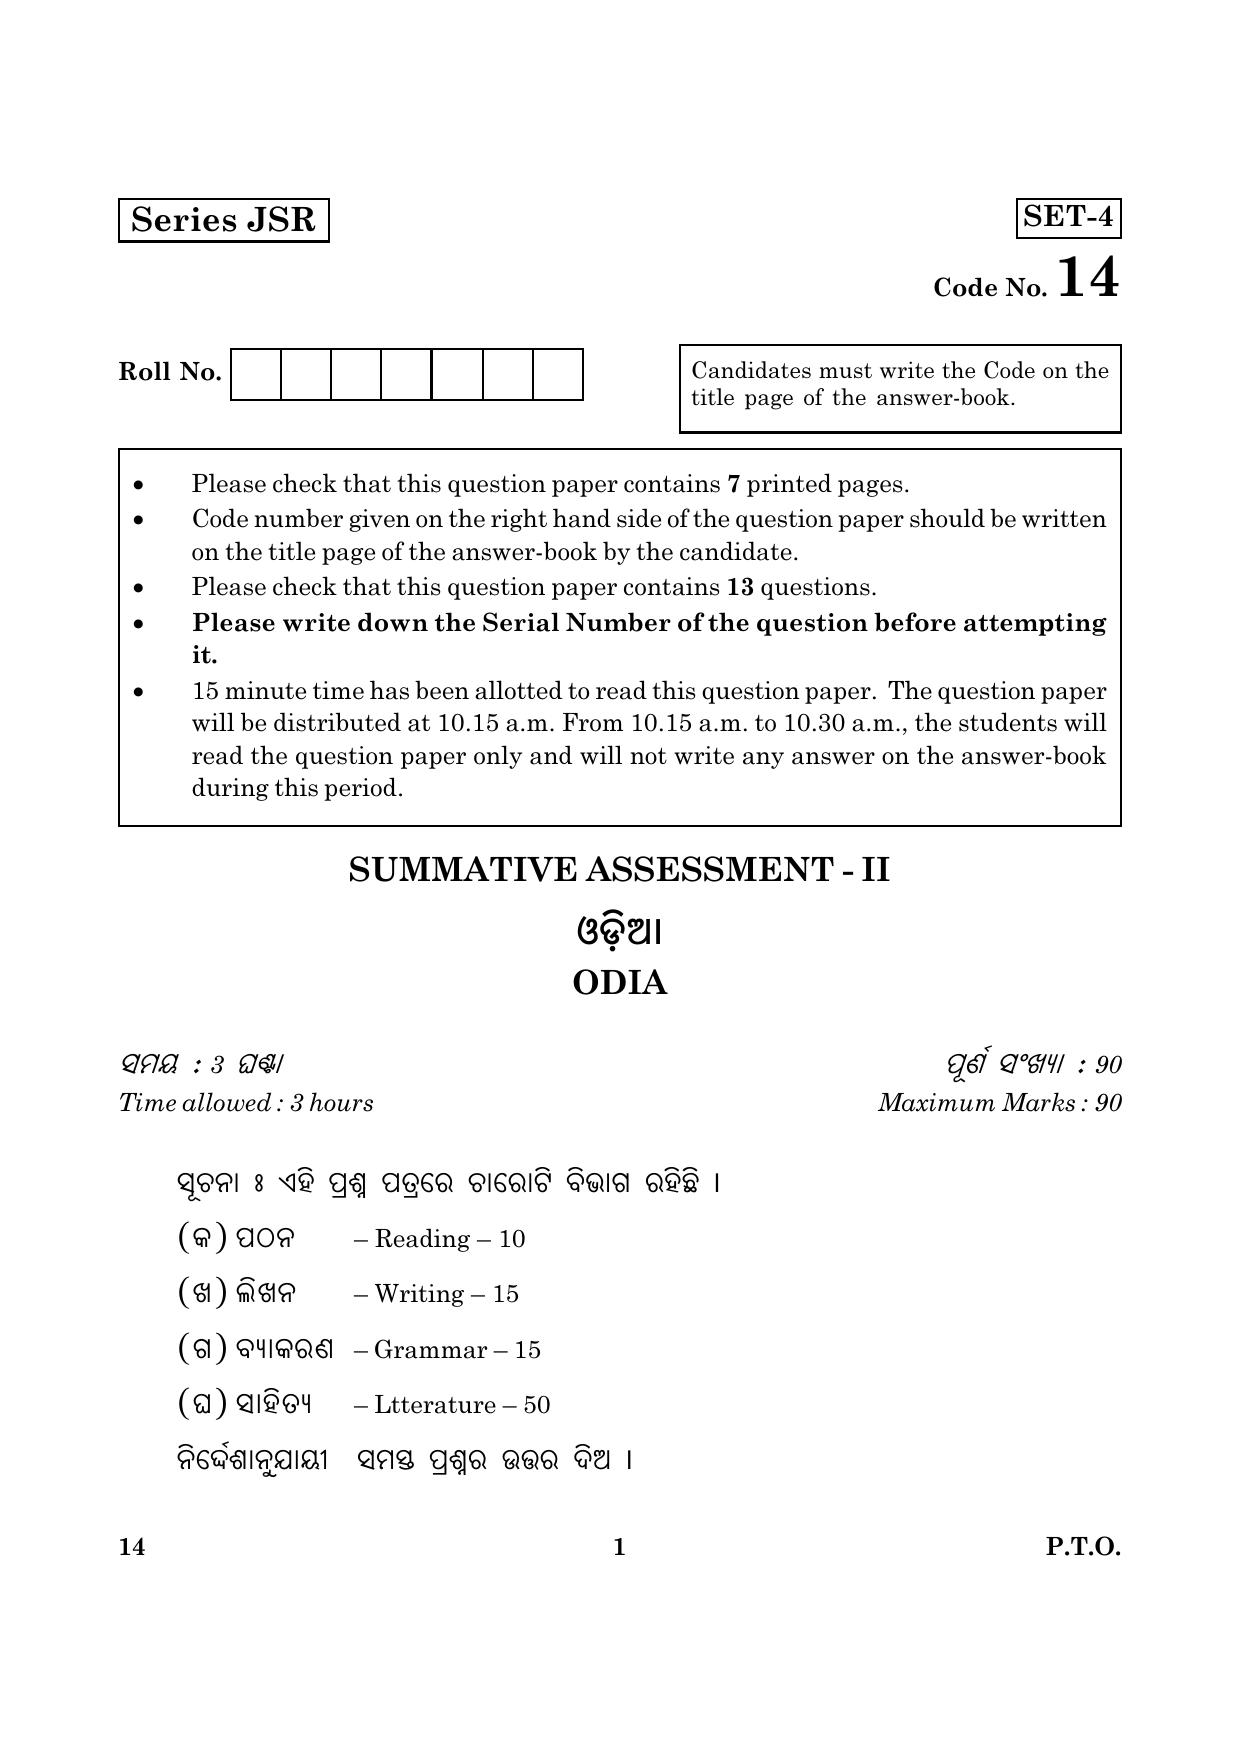 CBSE Class 10 014 Odia 2016 Question Paper - Page 1